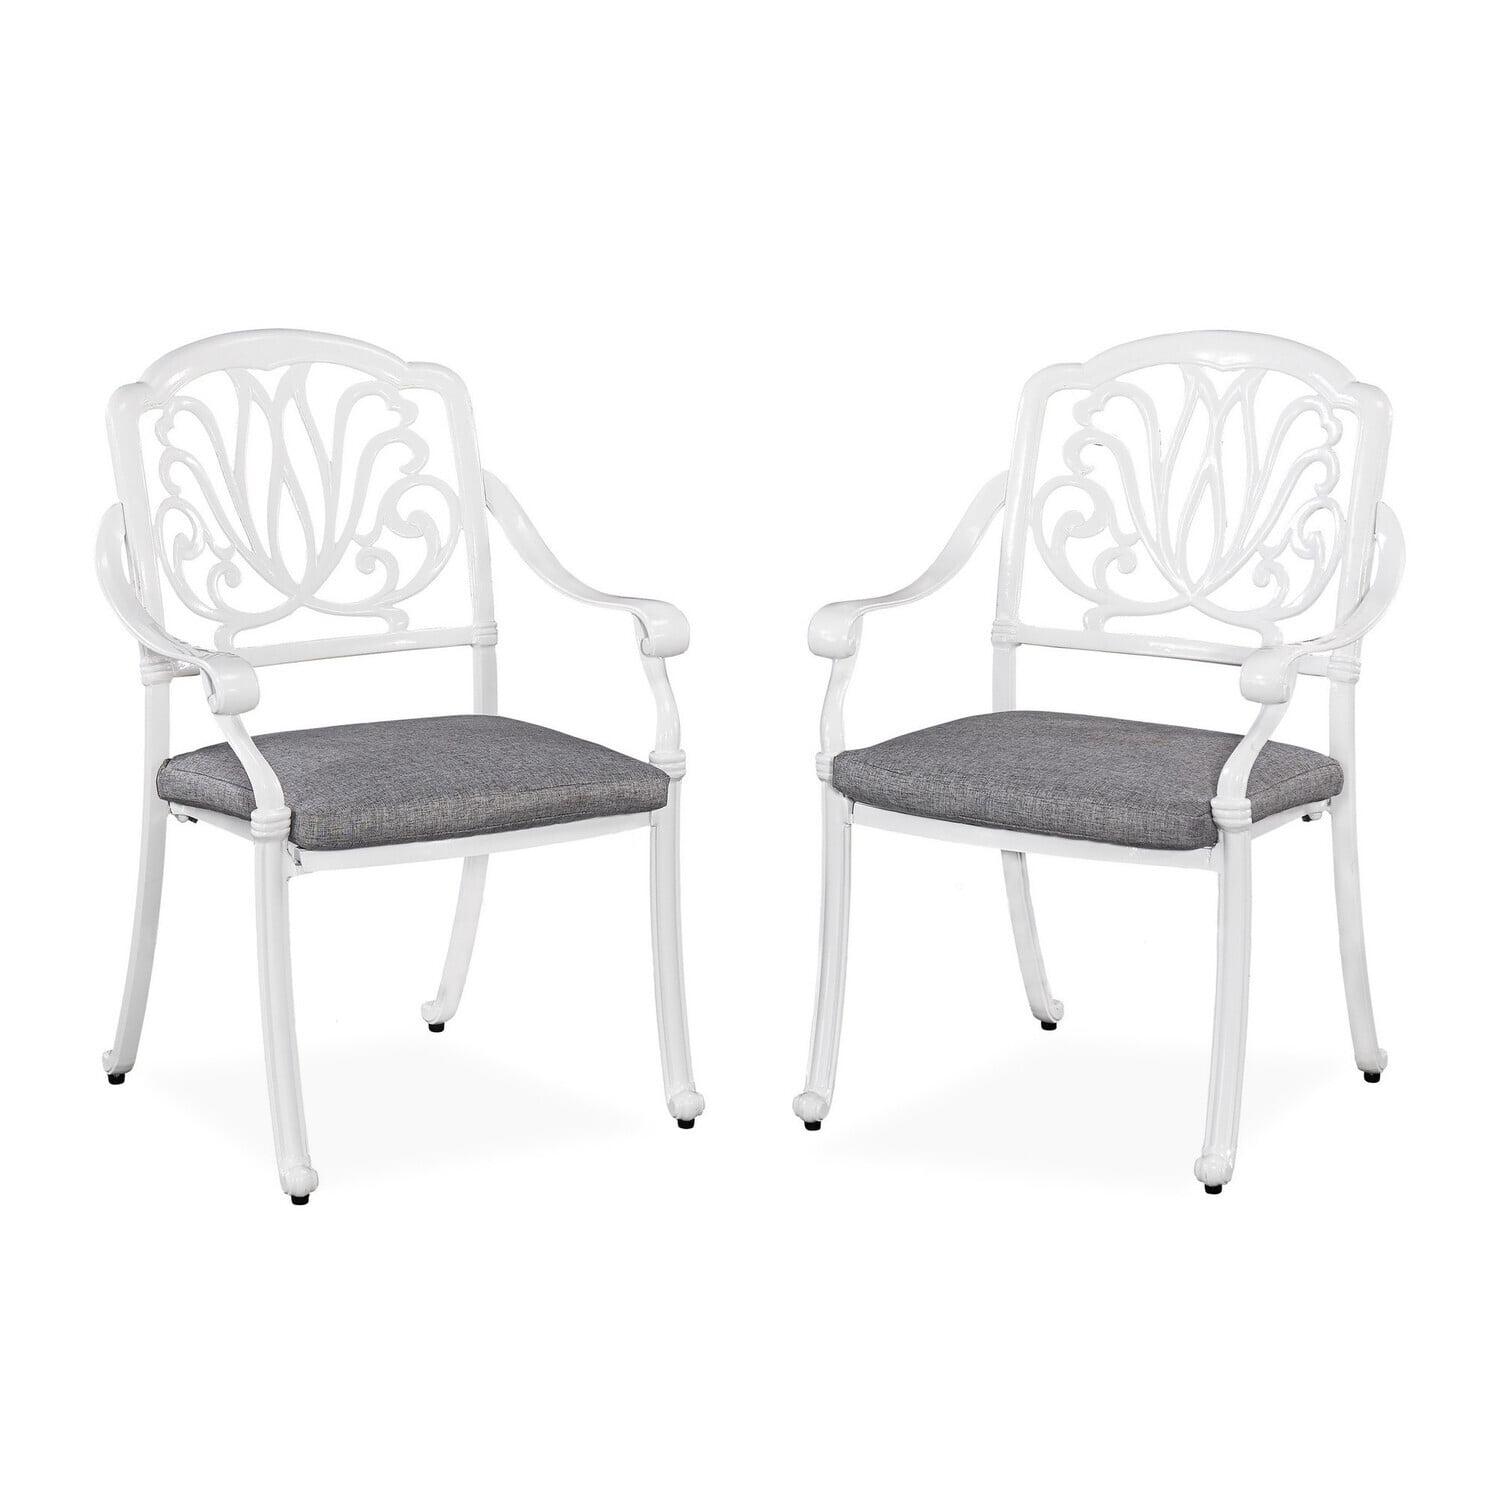 Rustic Refinement White Cast Aluminum Outdoor Chair with Cushions